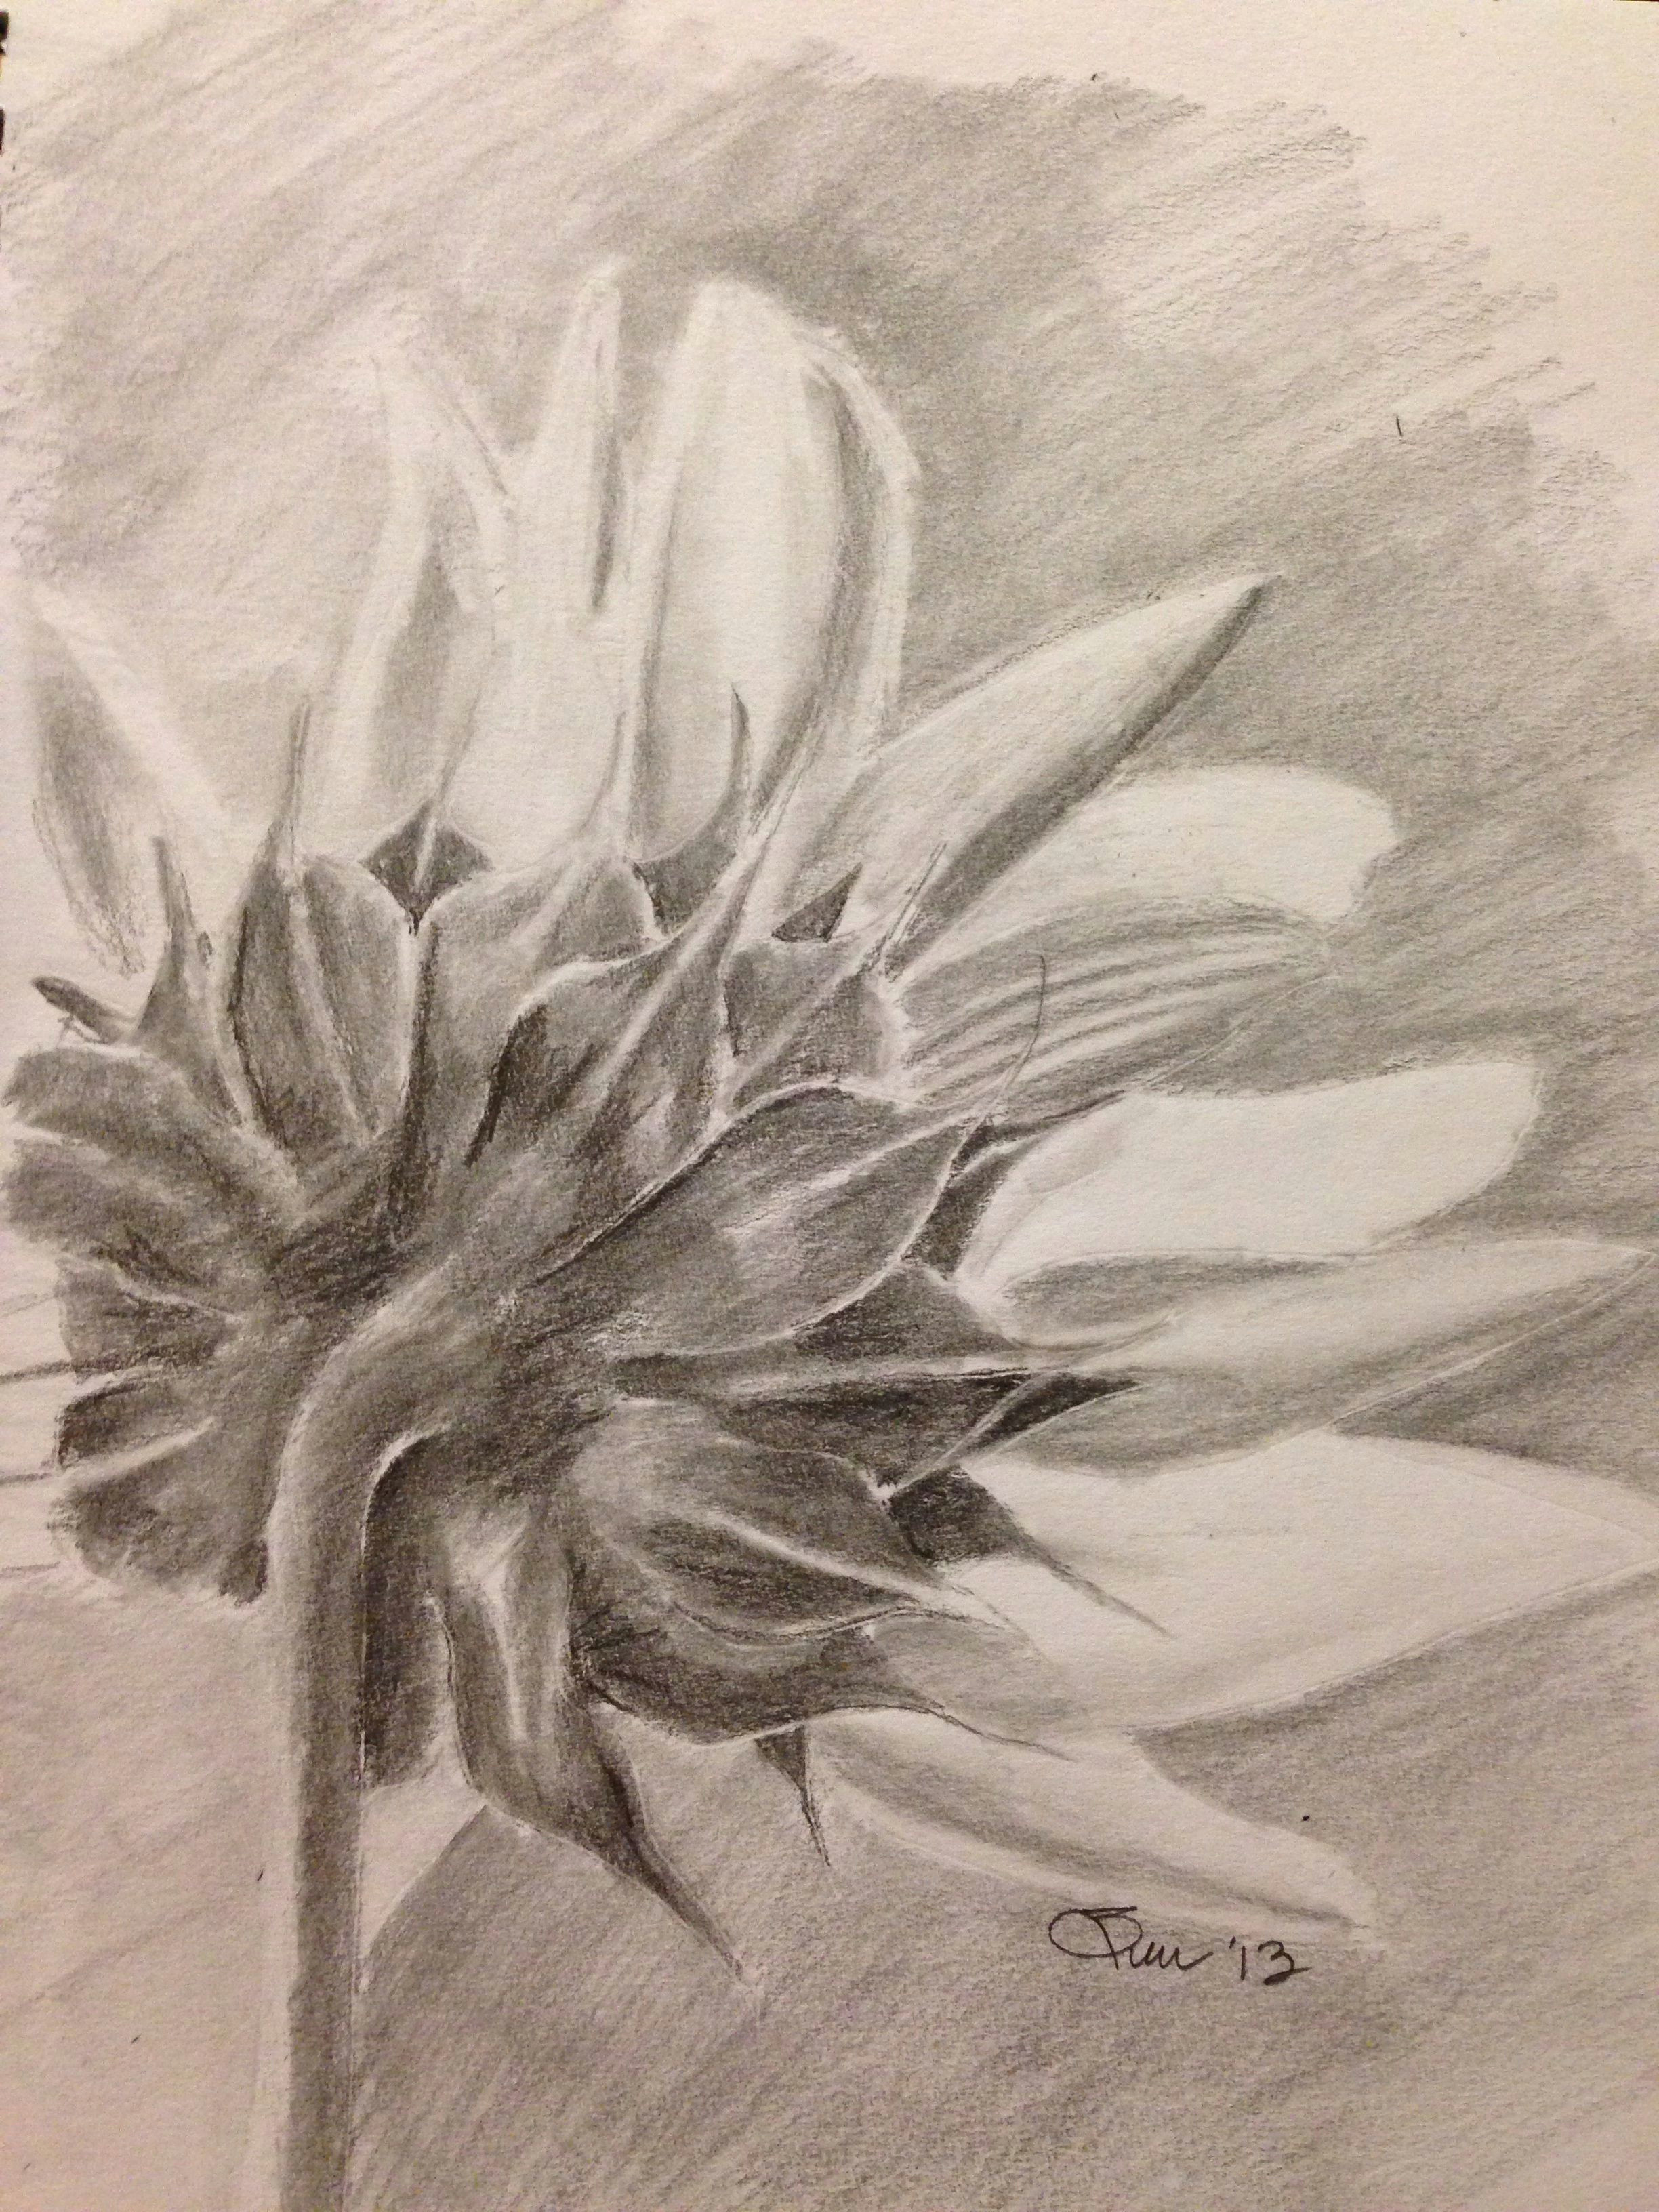 Graphite Pencil Drawings Of Flowers Sunflower Pencil Drawing Art My Creations Drawings Pencil